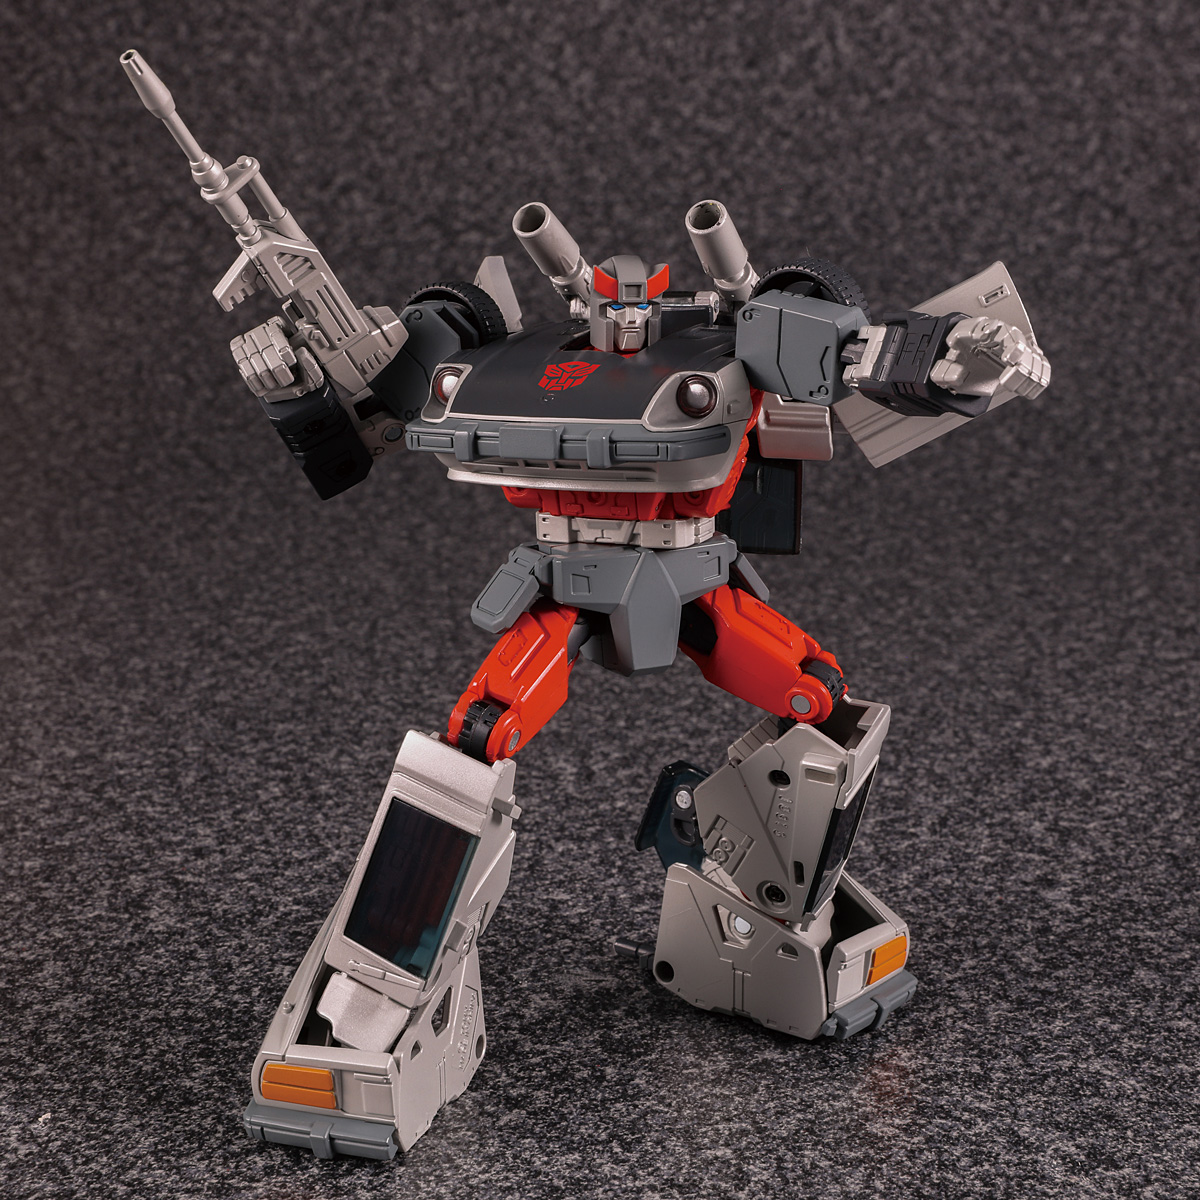 Toy Fair 2019 - Official Images: Transformers Masterpiece